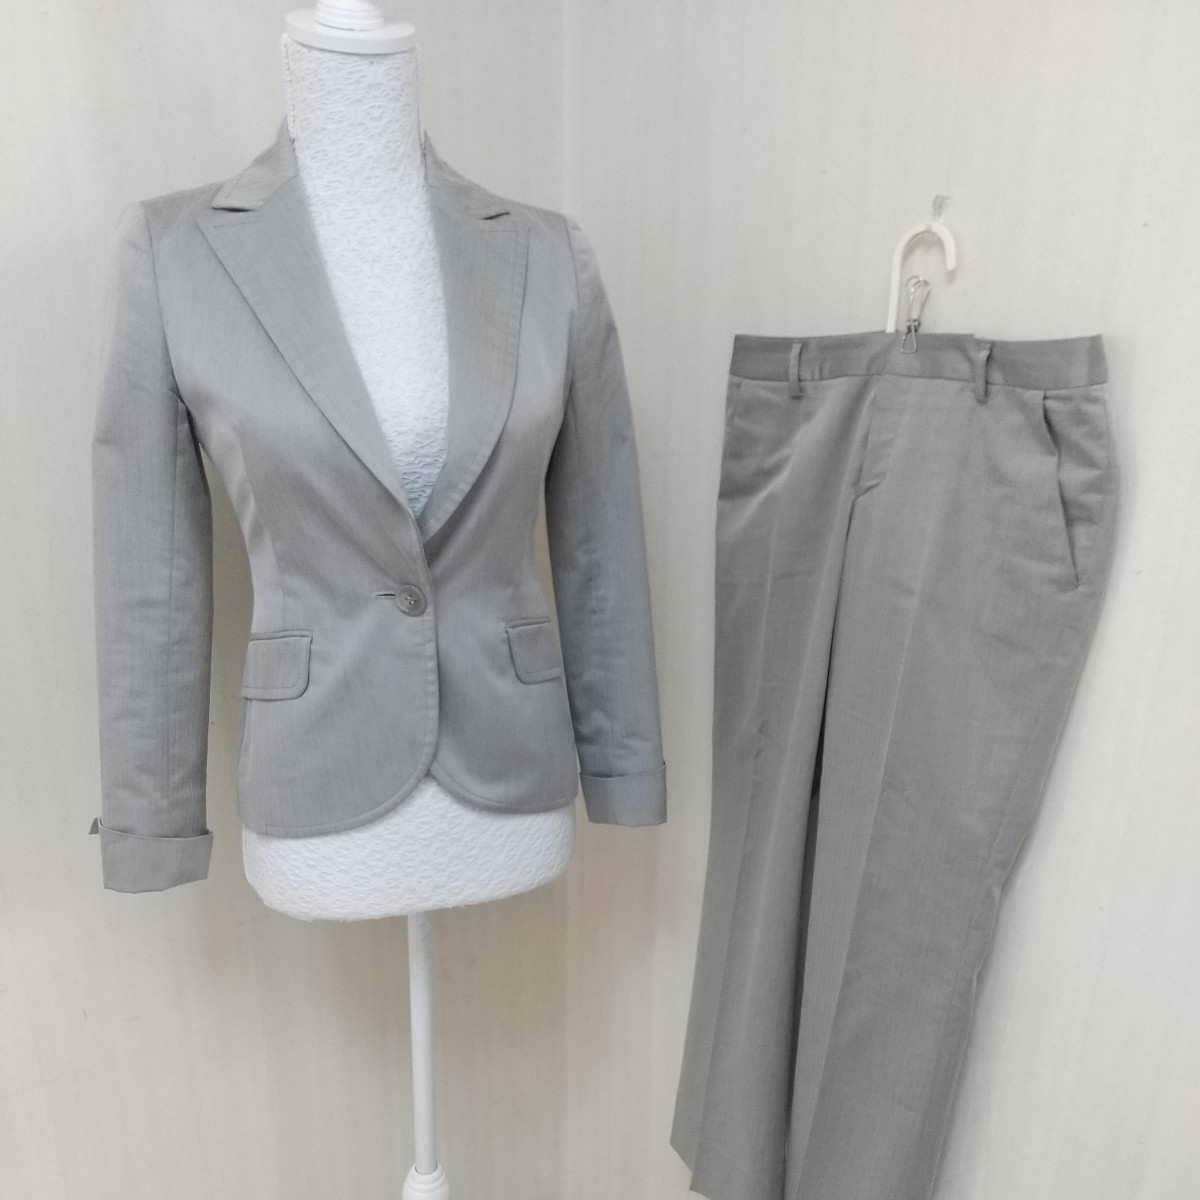 INDIVI Indy b pants suit gray light gray business suit setup lady's lining attaching world made in Japan beautiful goods 